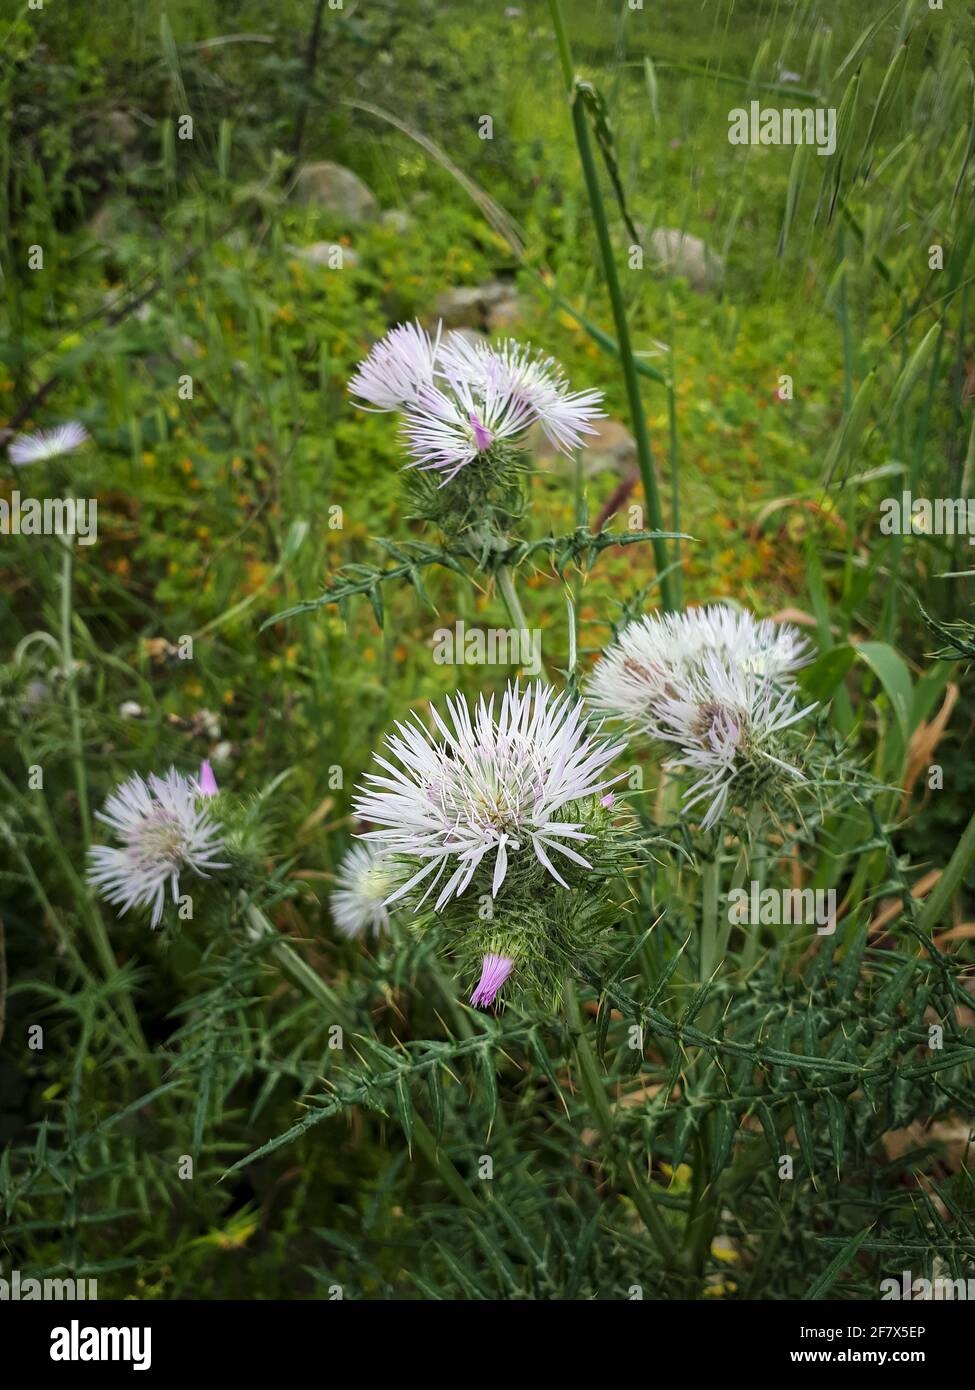 Flowering galactites tomentosa moench boar thistle plants in nature Stock Photo